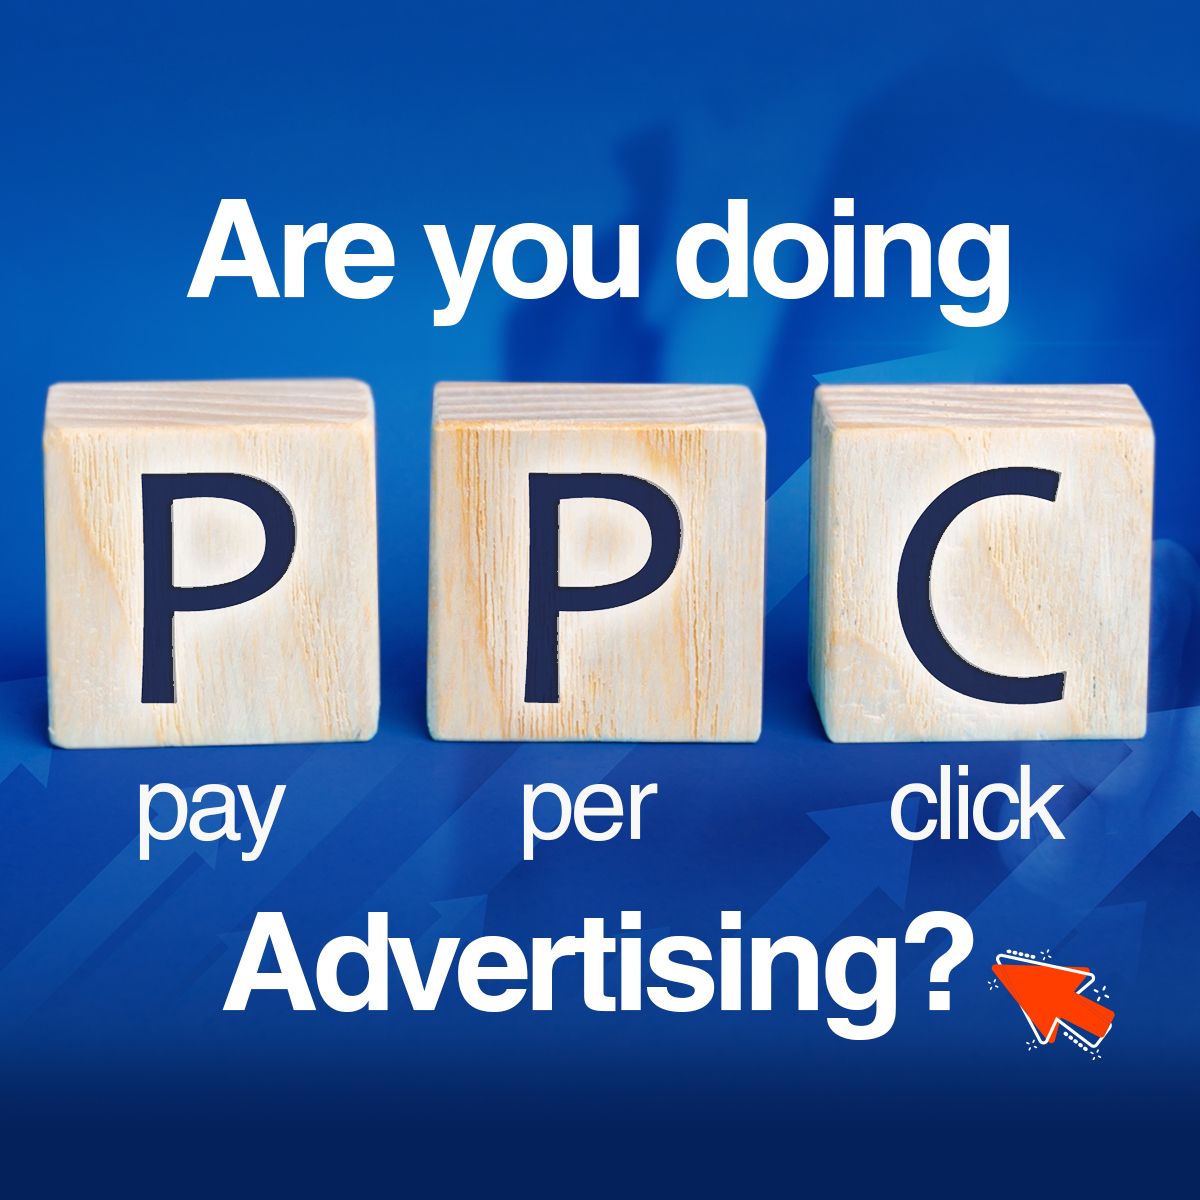 Are you doing Pay Per Click advertising?